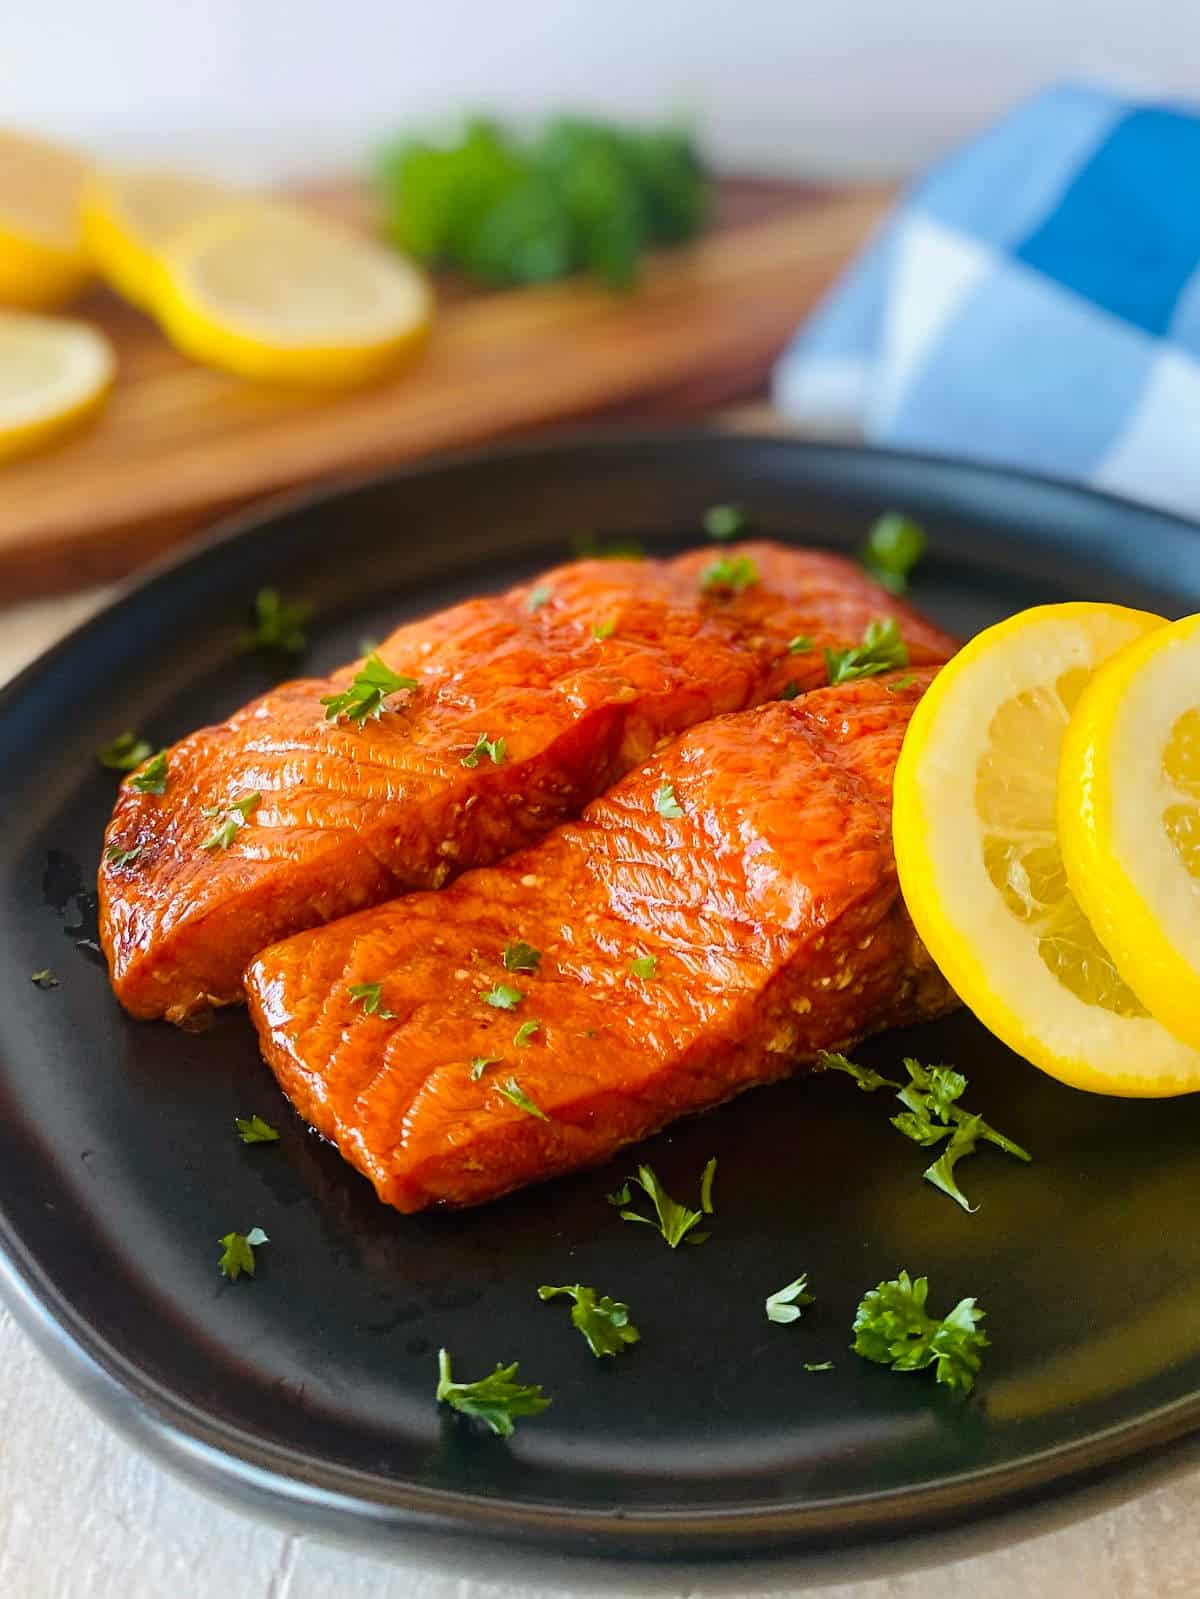 two smoked salmon filets on a plate with sliced lemons.